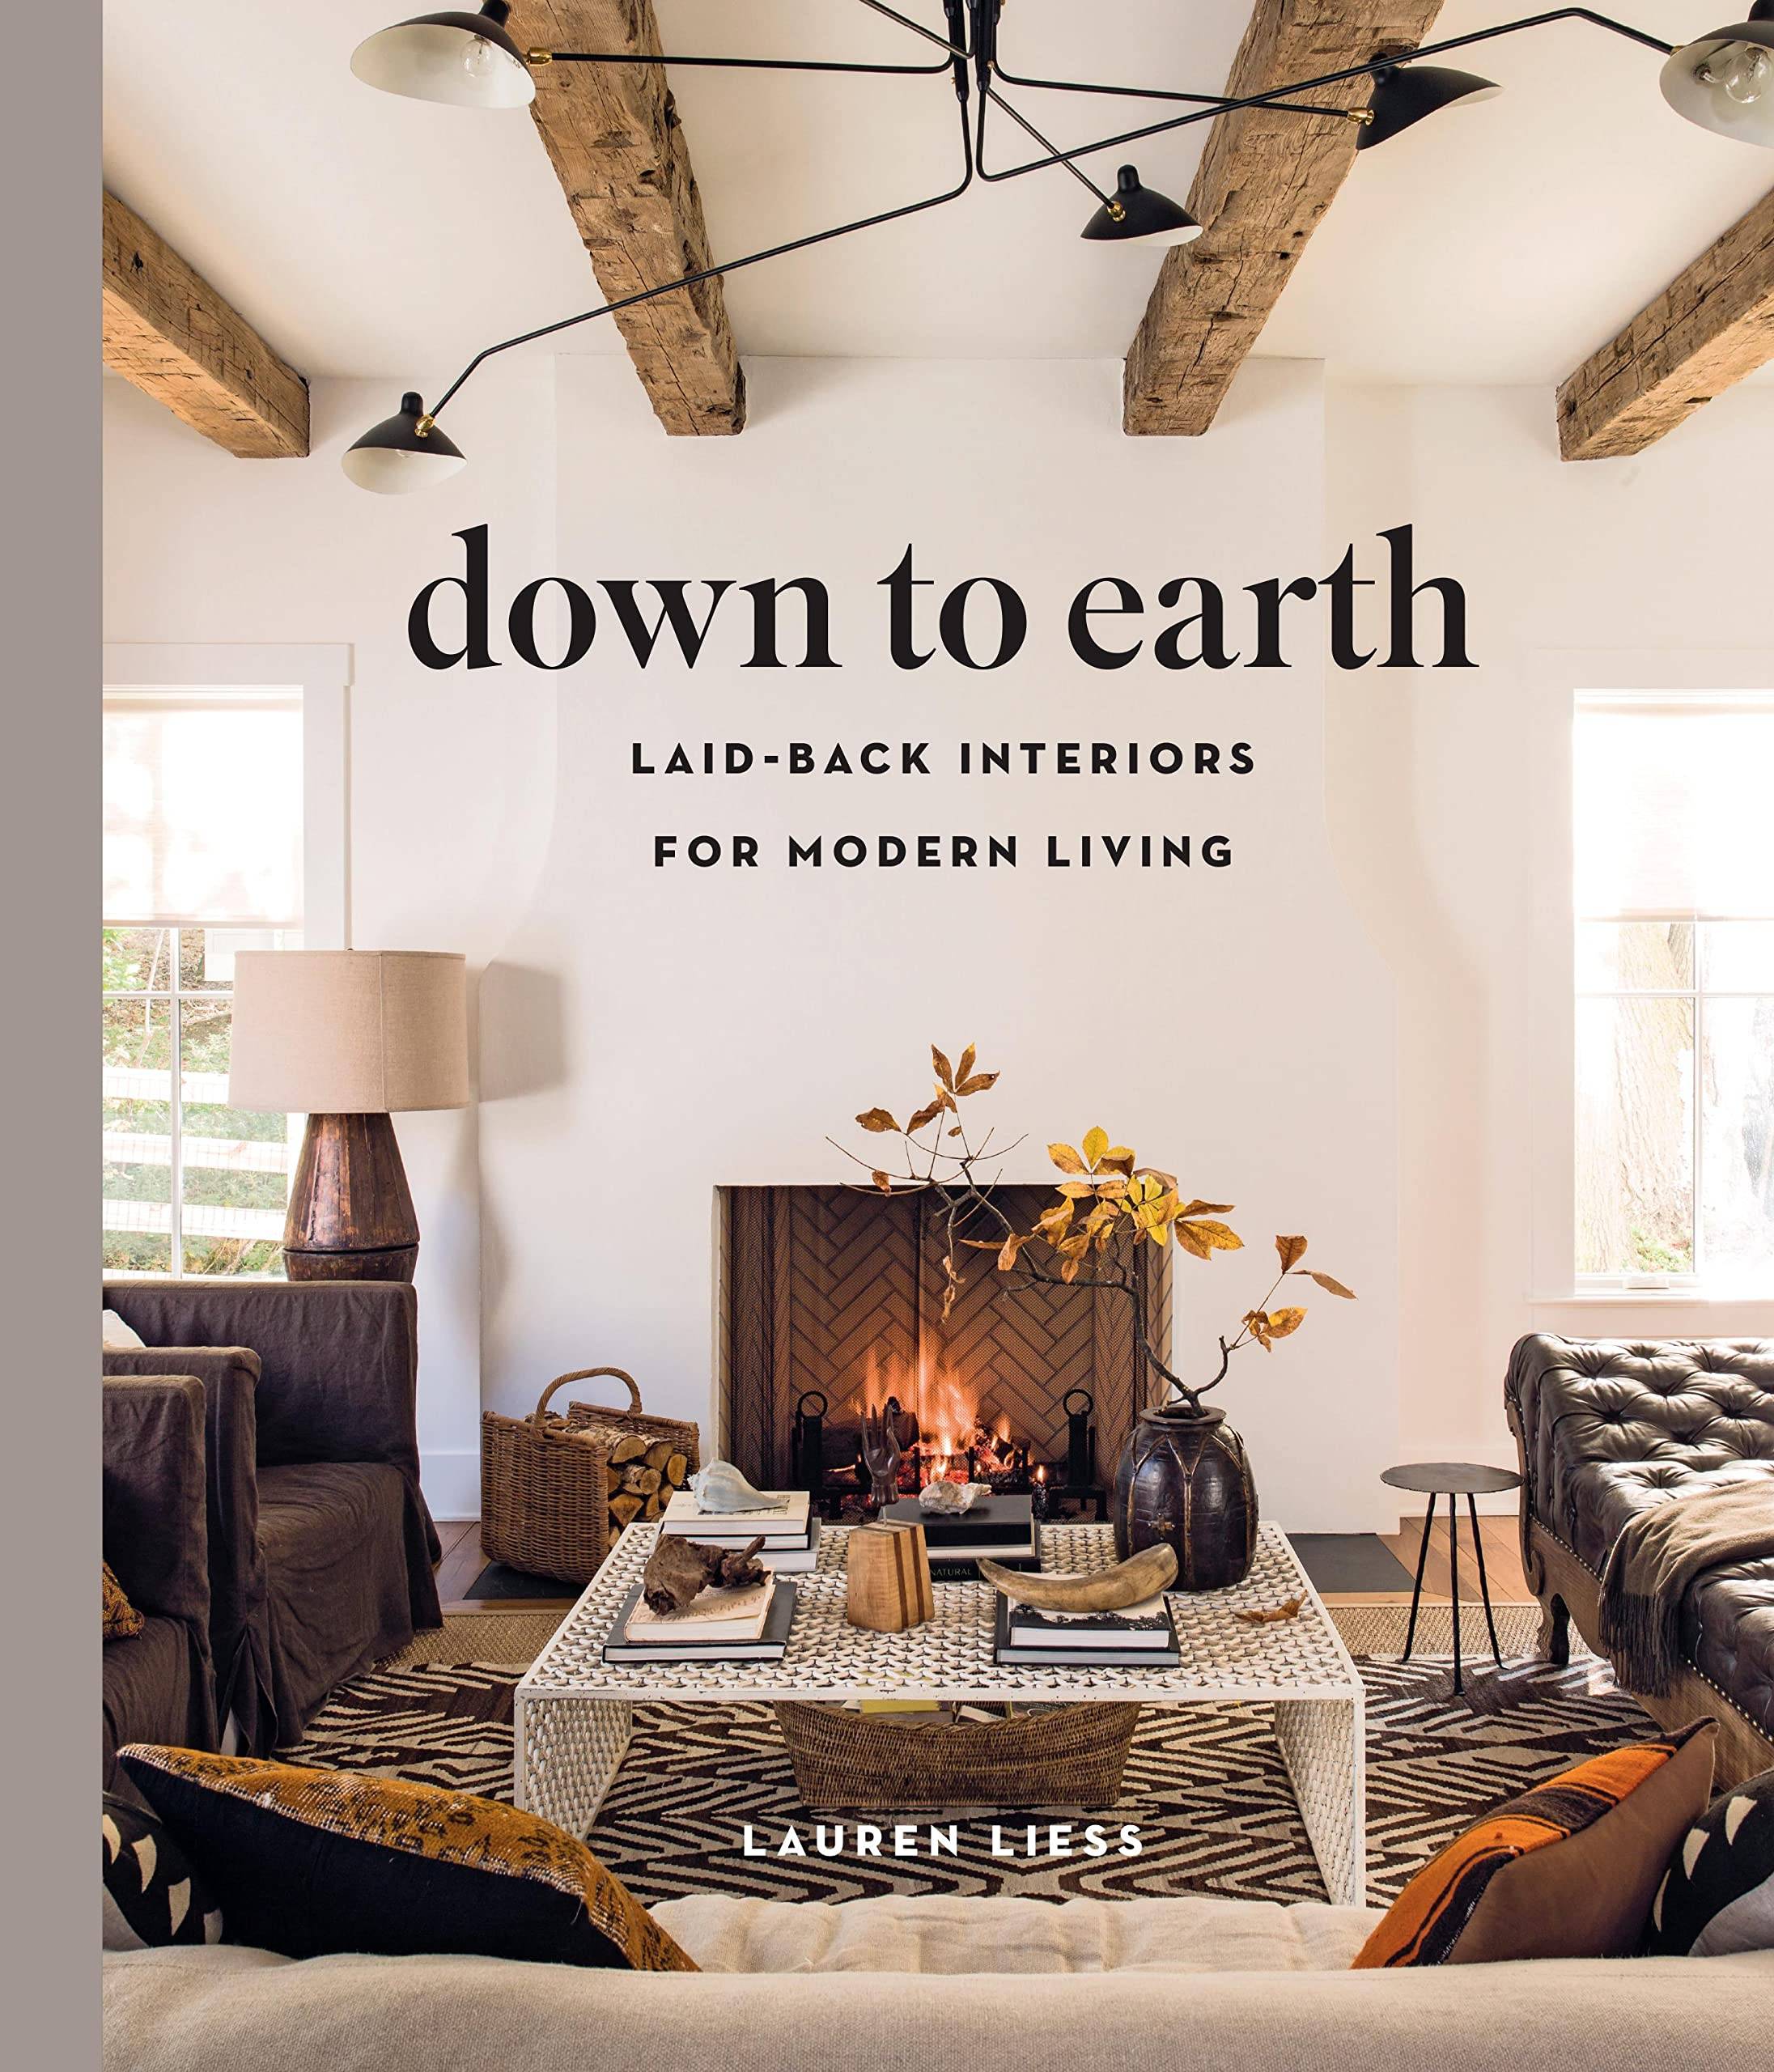 Down-to-Earth-Laid-back-Interiors-for-Modern-Living-By-Lauren-Liess-36836